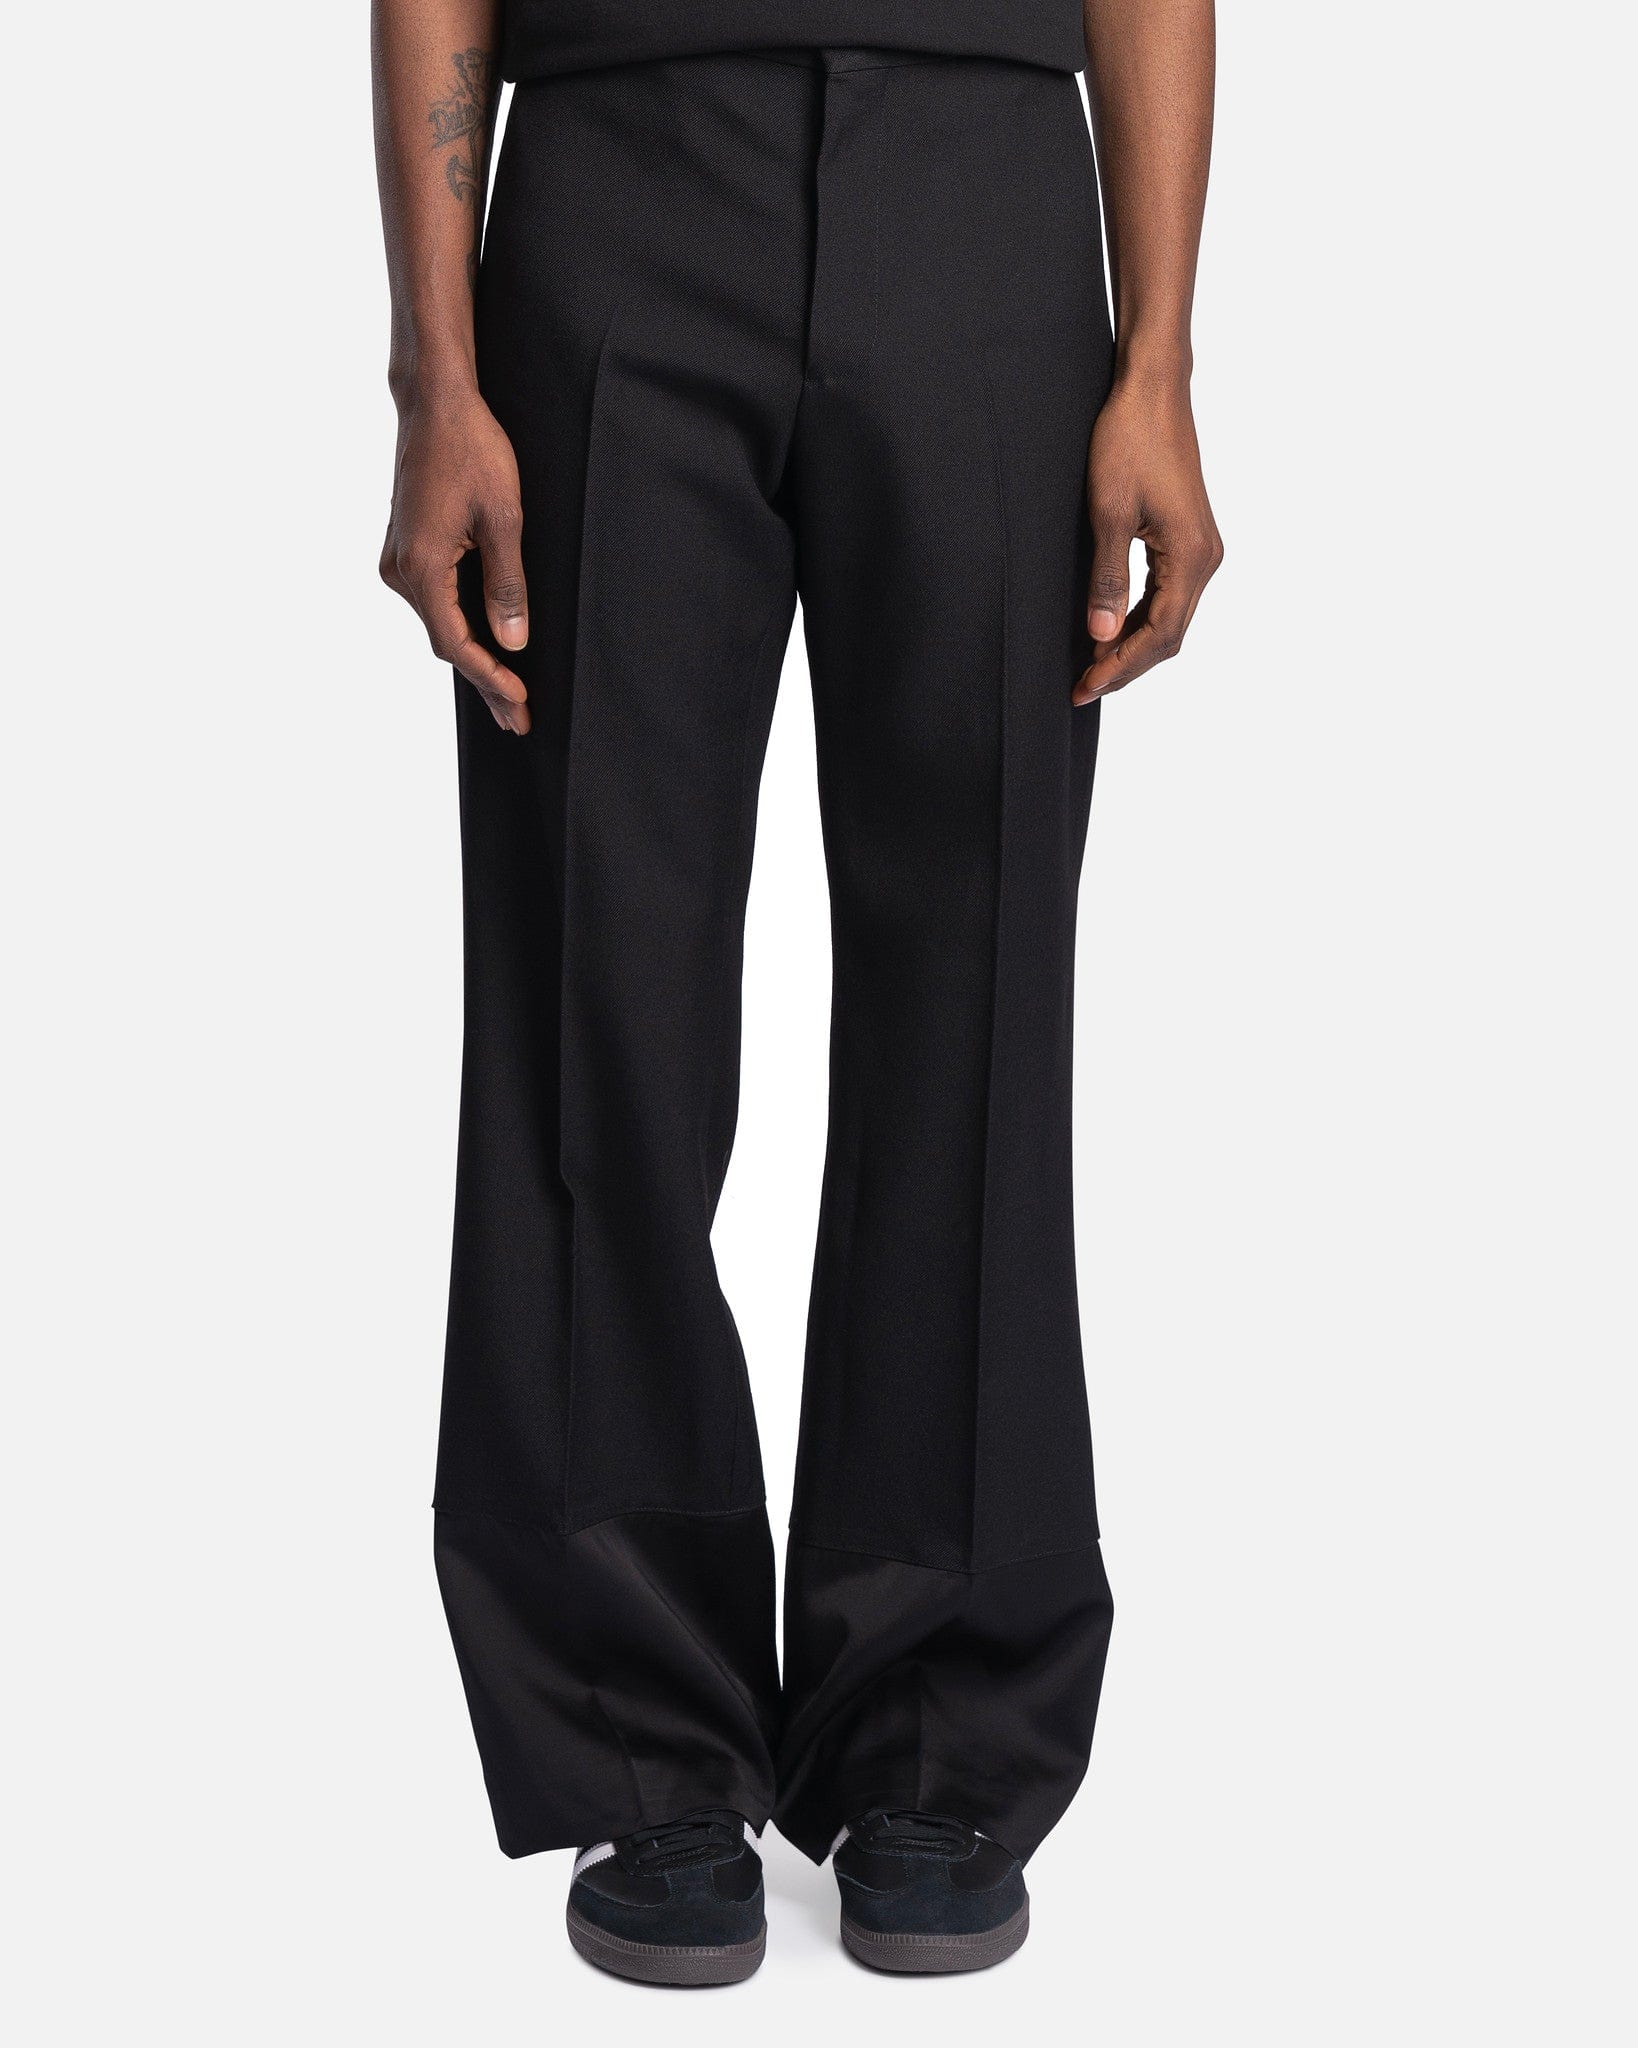 Harmony Trousers in Black